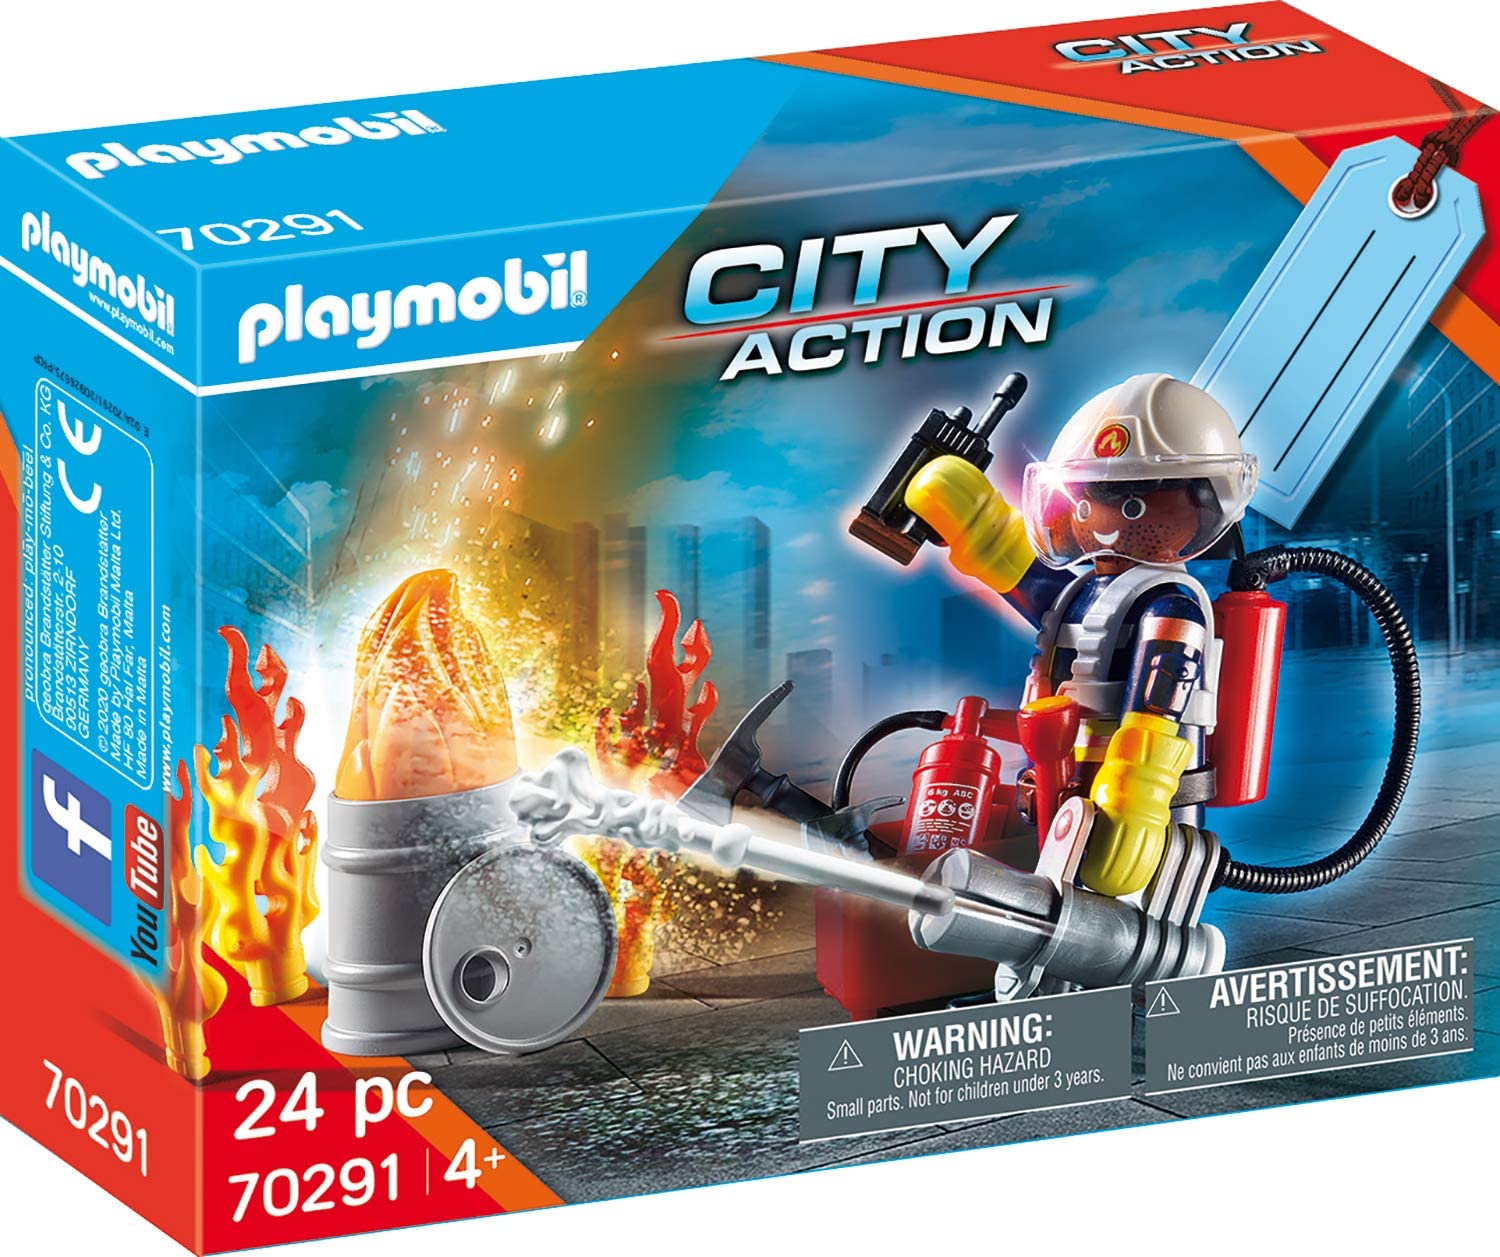 Playmobil CityAction 70291 Gift Set "Fire Brigade" for Age 4 and Above